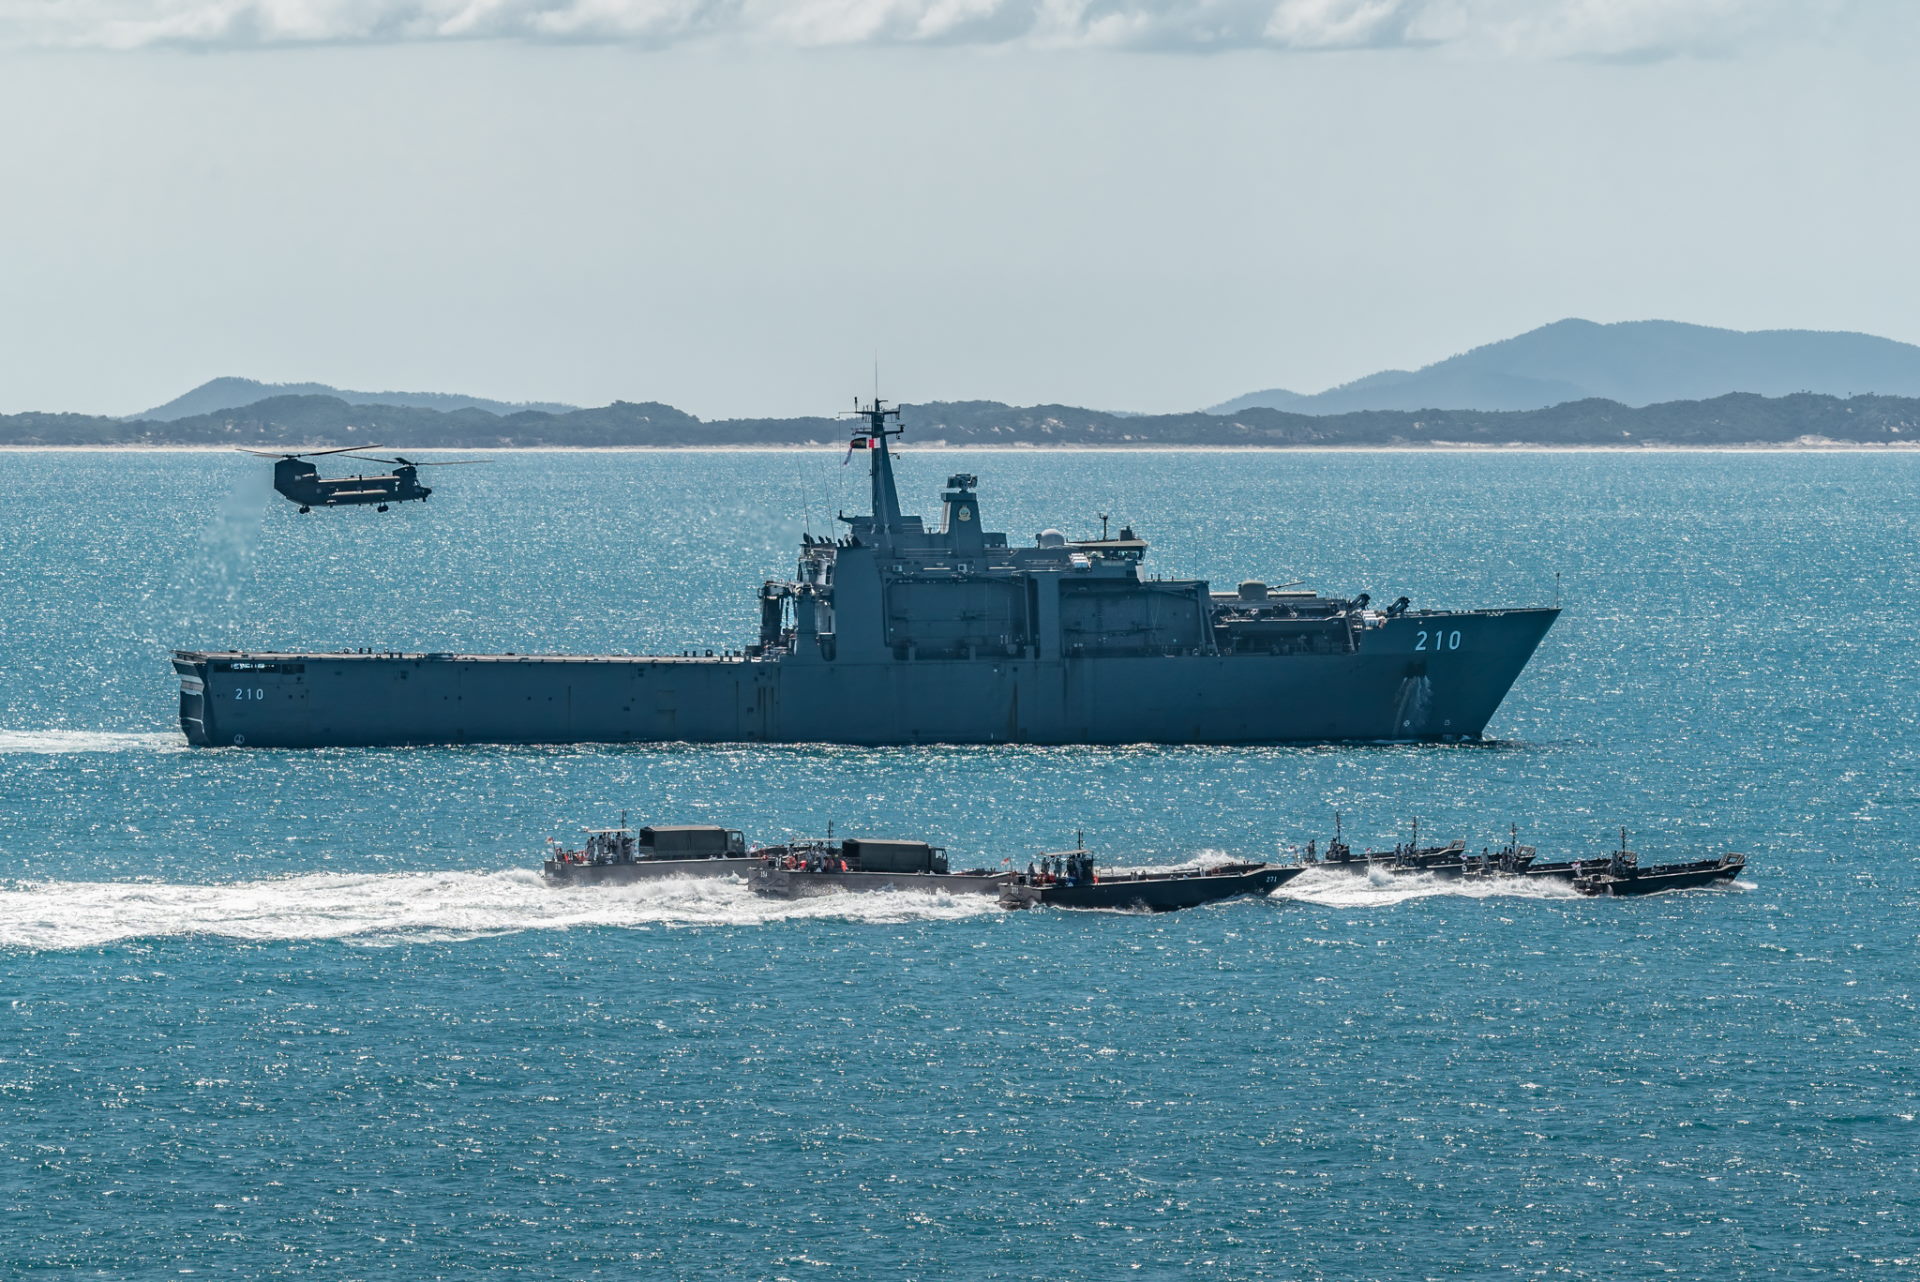 The Singapore Armed Forces (SAF) conducting a tri-Service integrated exercise as part of Exercise Wallaby 21 (XWB21), held from 13 September to 21 October in the Shoalwater Bay Training Area (SWBTA) in Queensland, Australia.